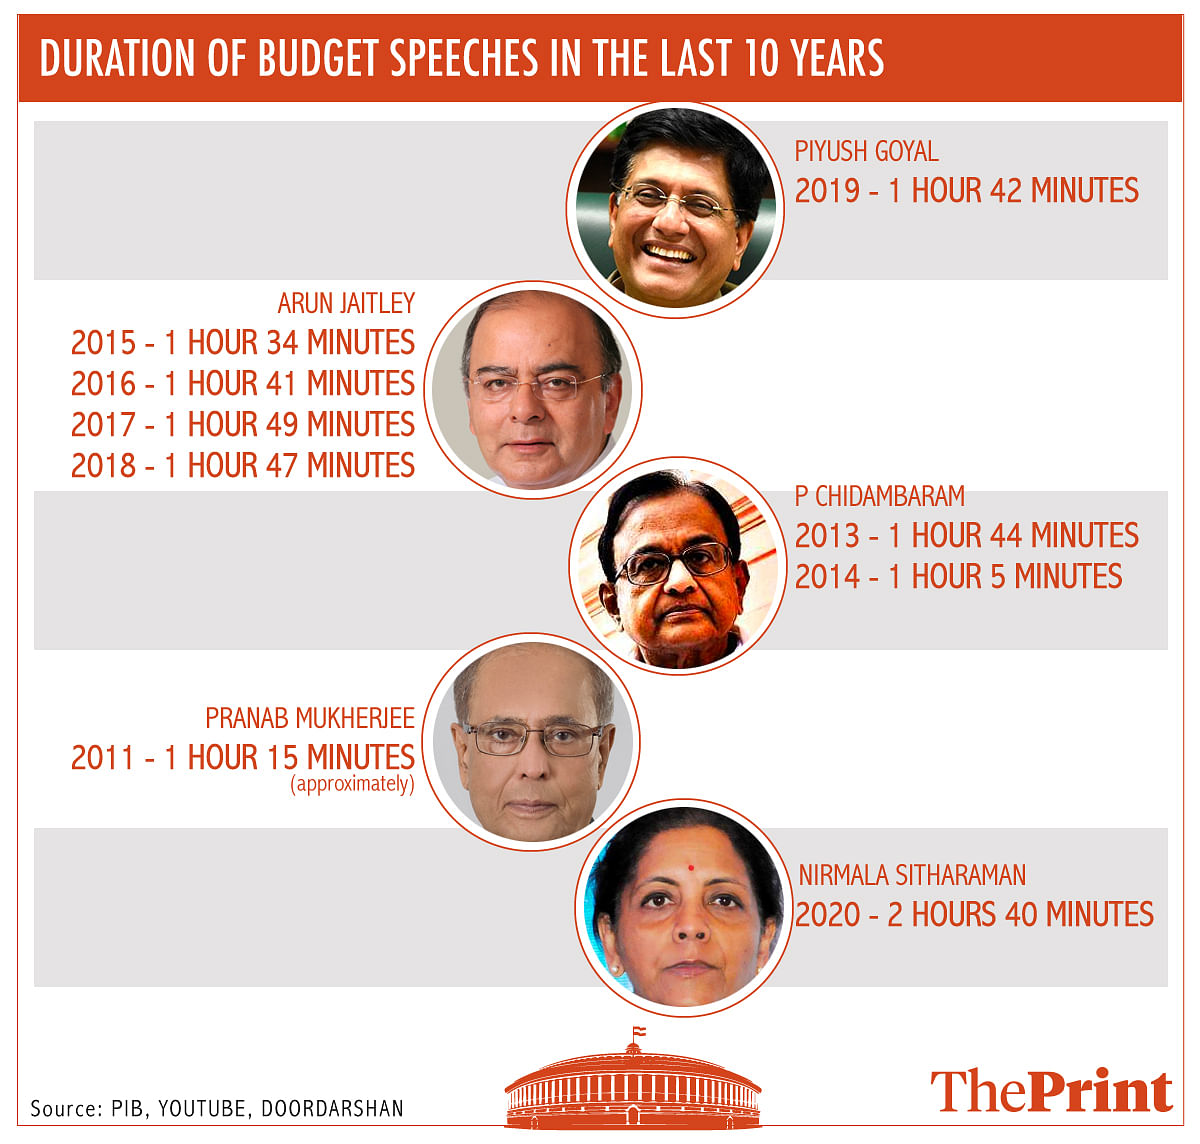 Durations of budget speeches by former finance ministers | Infograph by Arindam Mukherjee | ThePrint